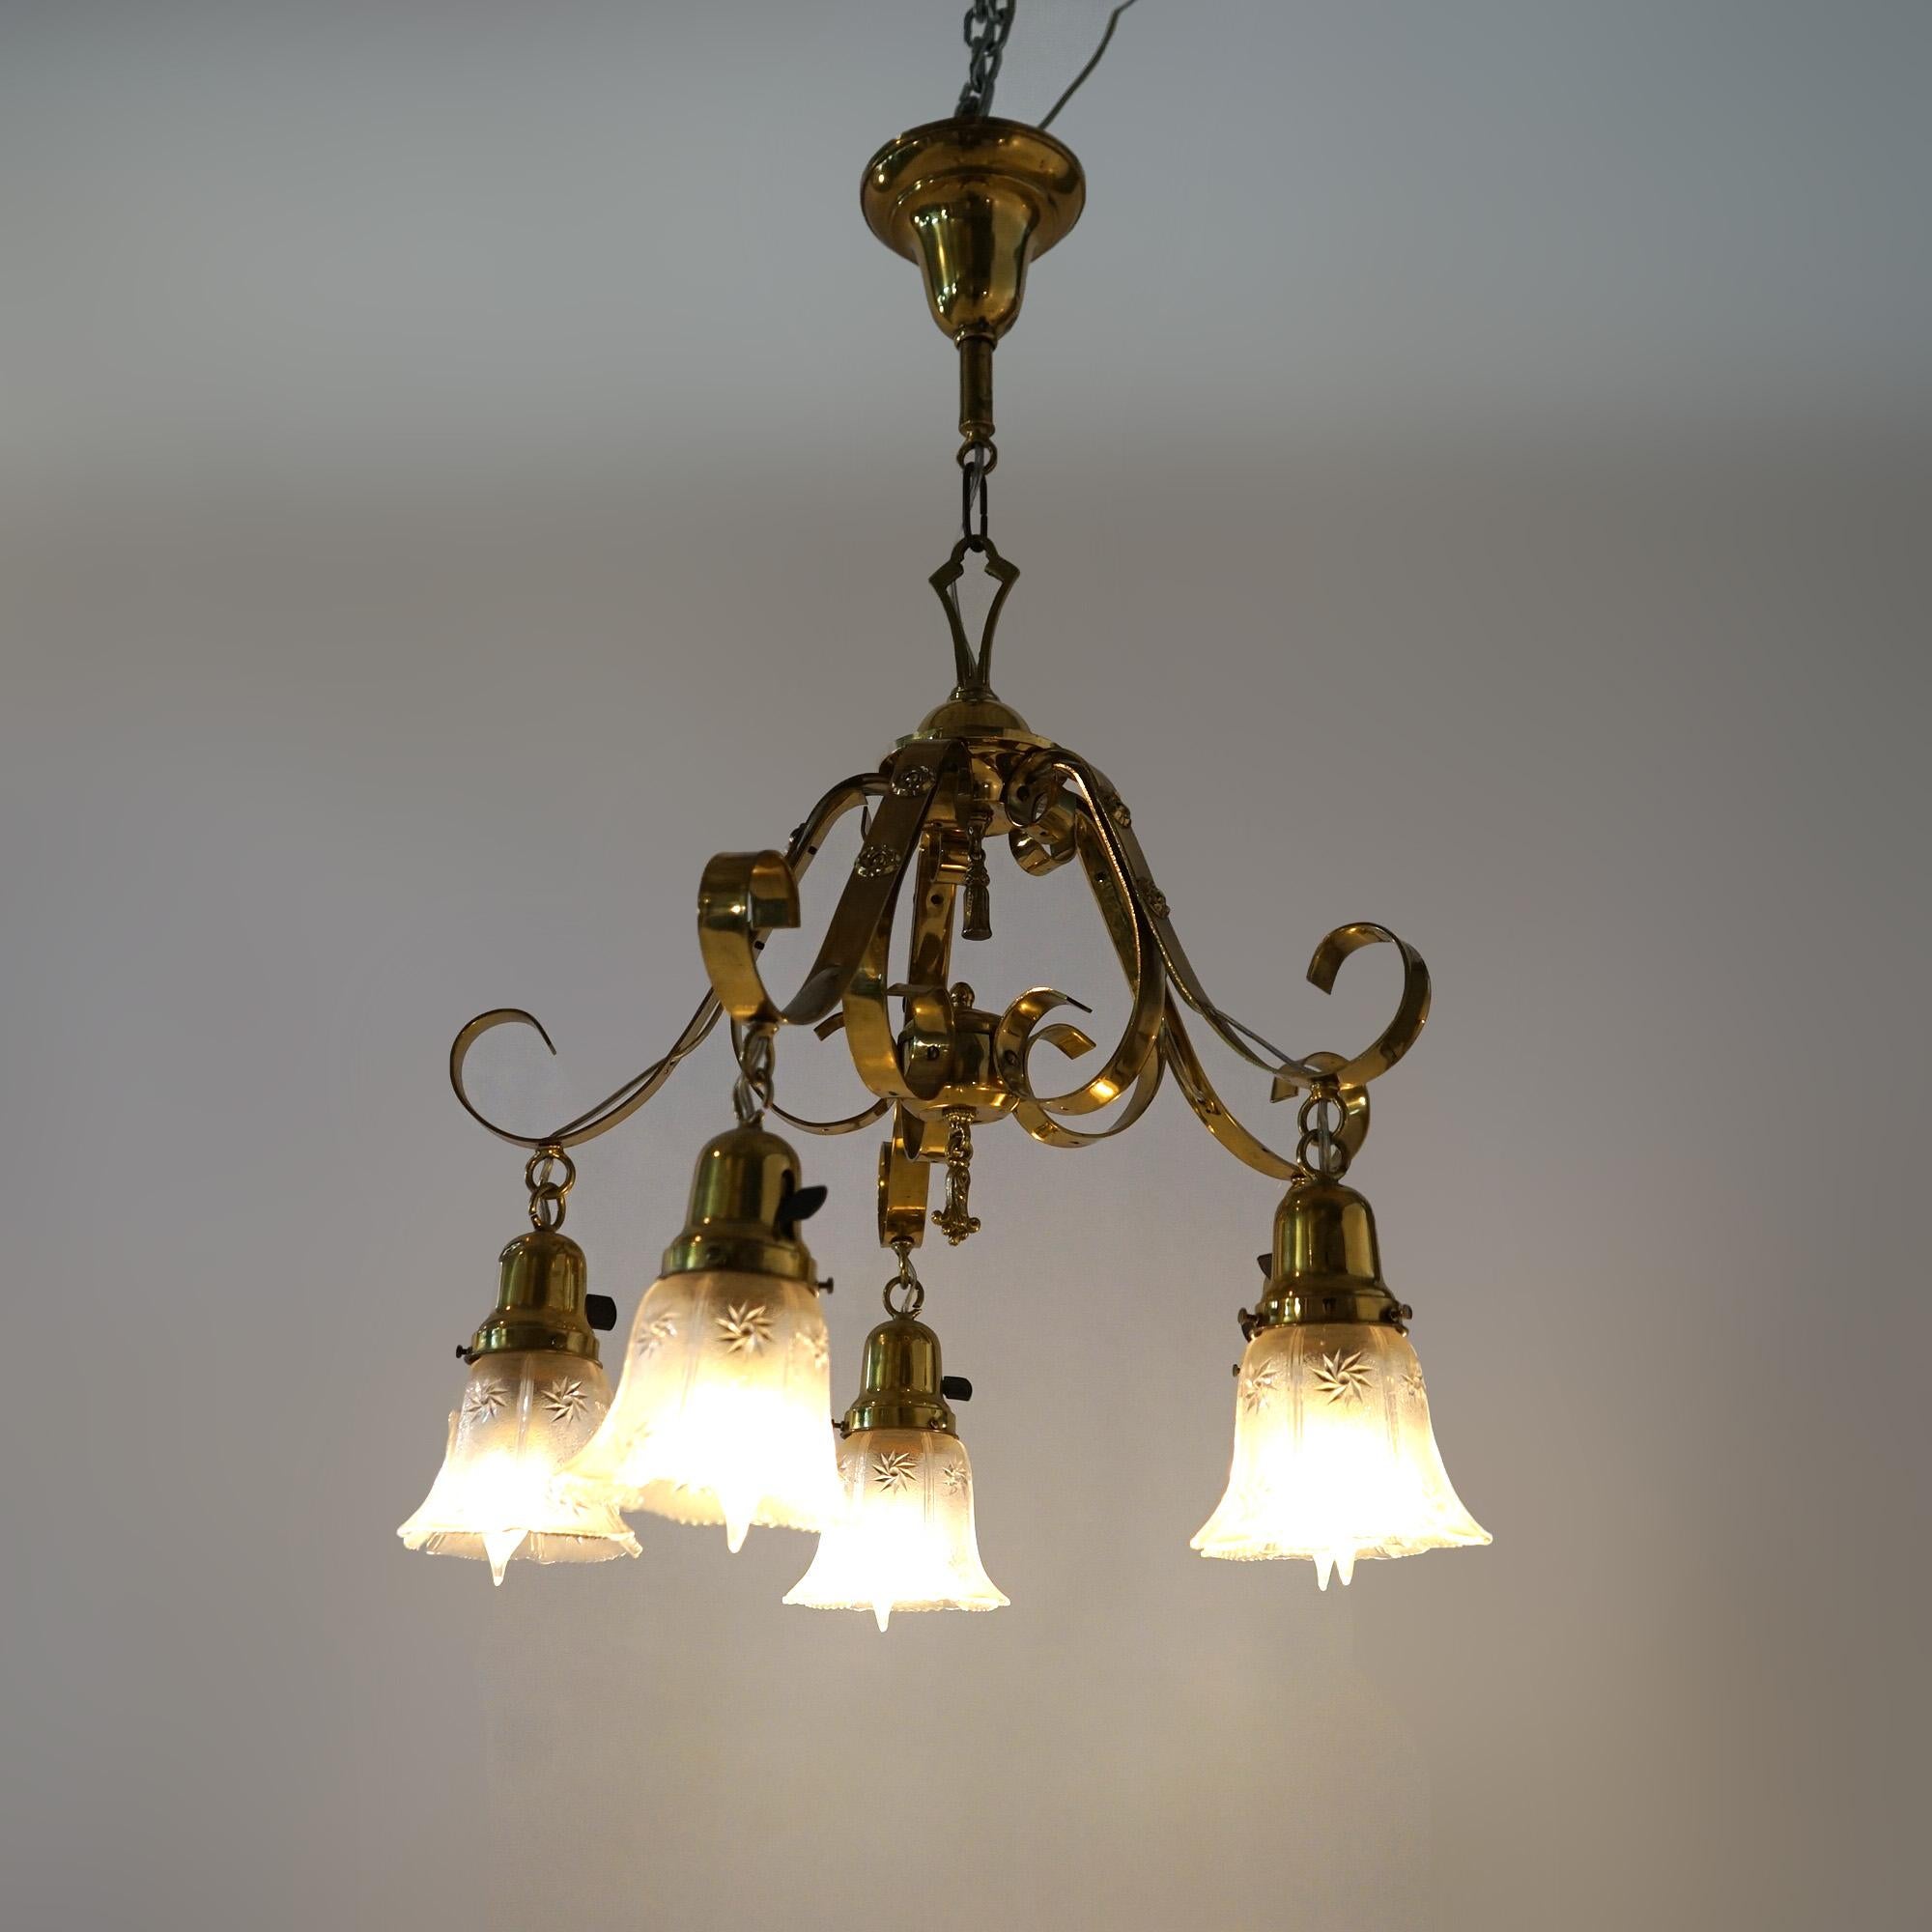 Antique Arts & Crafts Gilt Metal & Brass Hanging Fixture, Embossed Shades c1920 In Good Condition For Sale In Big Flats, NY